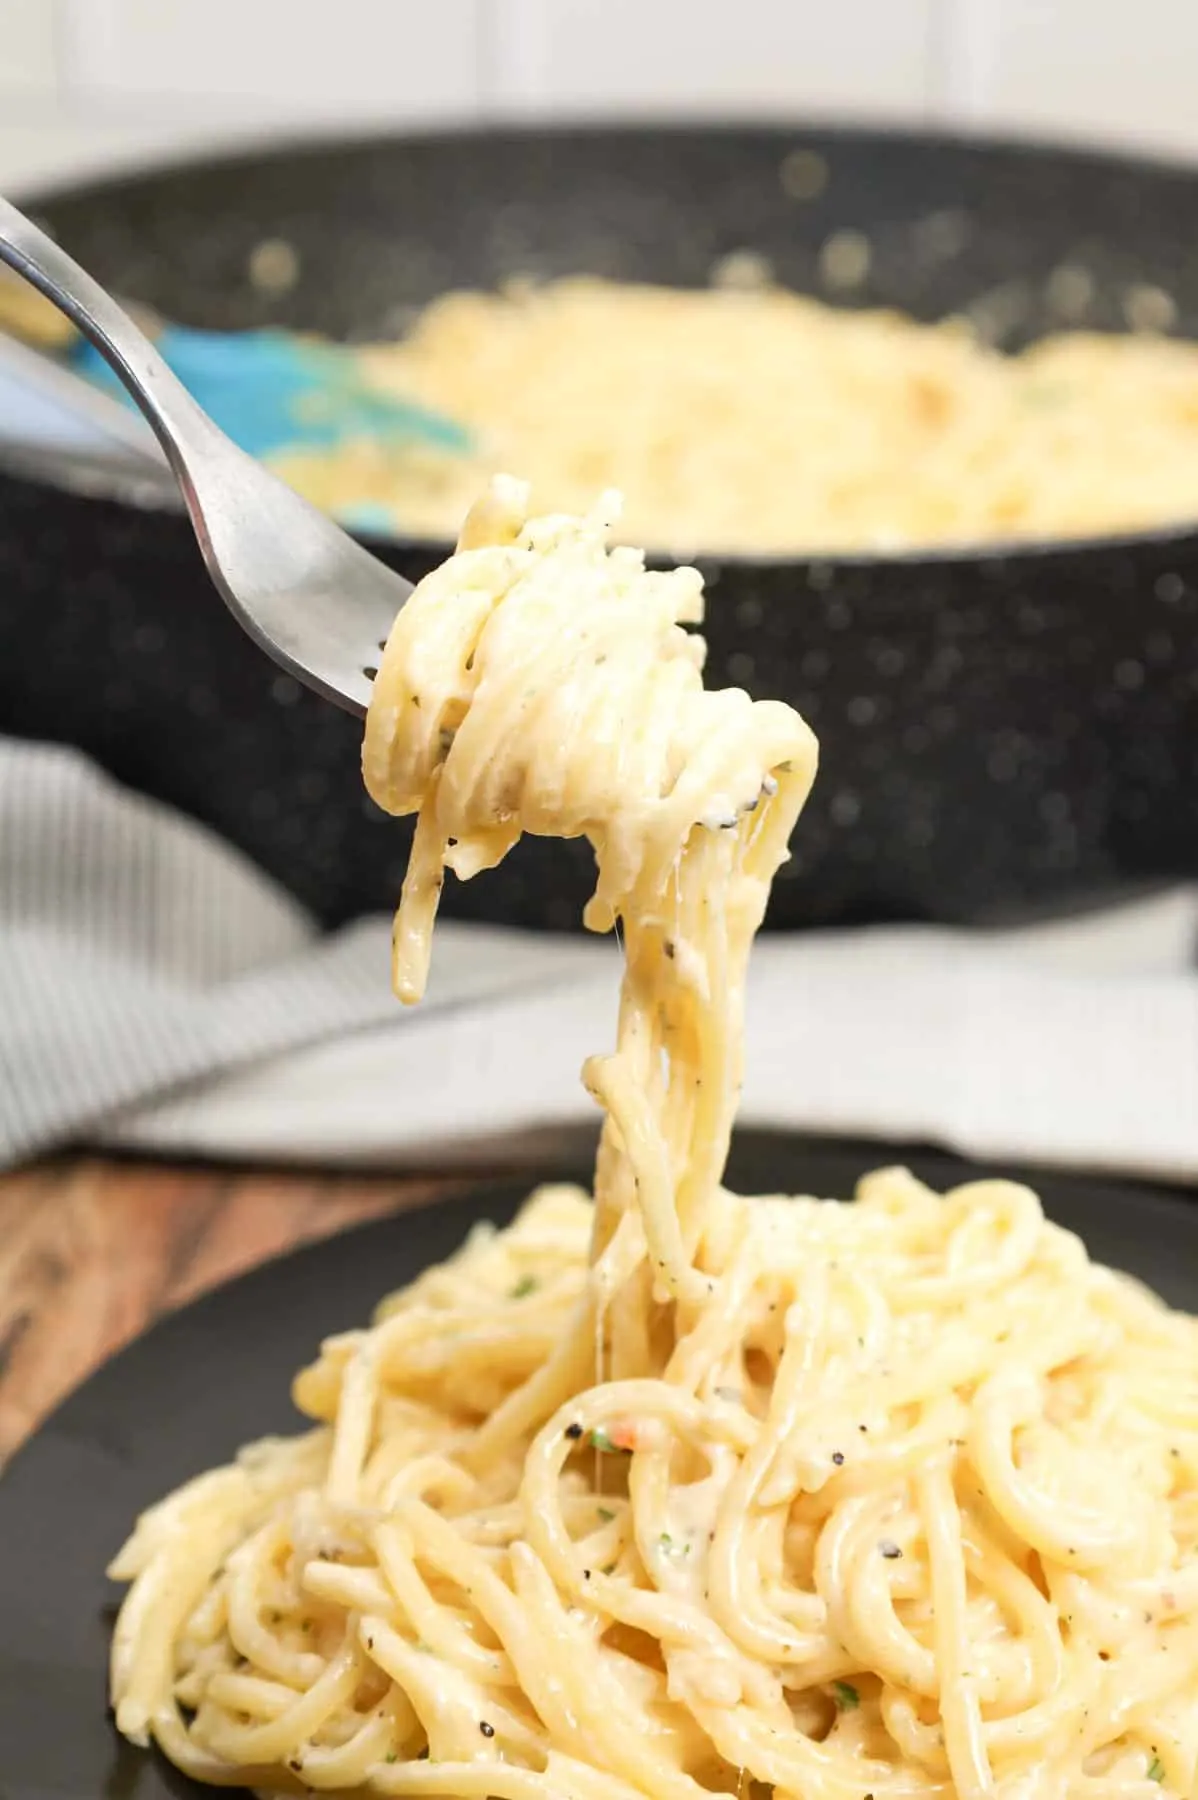 Spaghetti Alfredo is rich and creamy pasta recipe made with butter, minced garlic, heavy cream, Italian seasoning and shredded parmesan cheese.